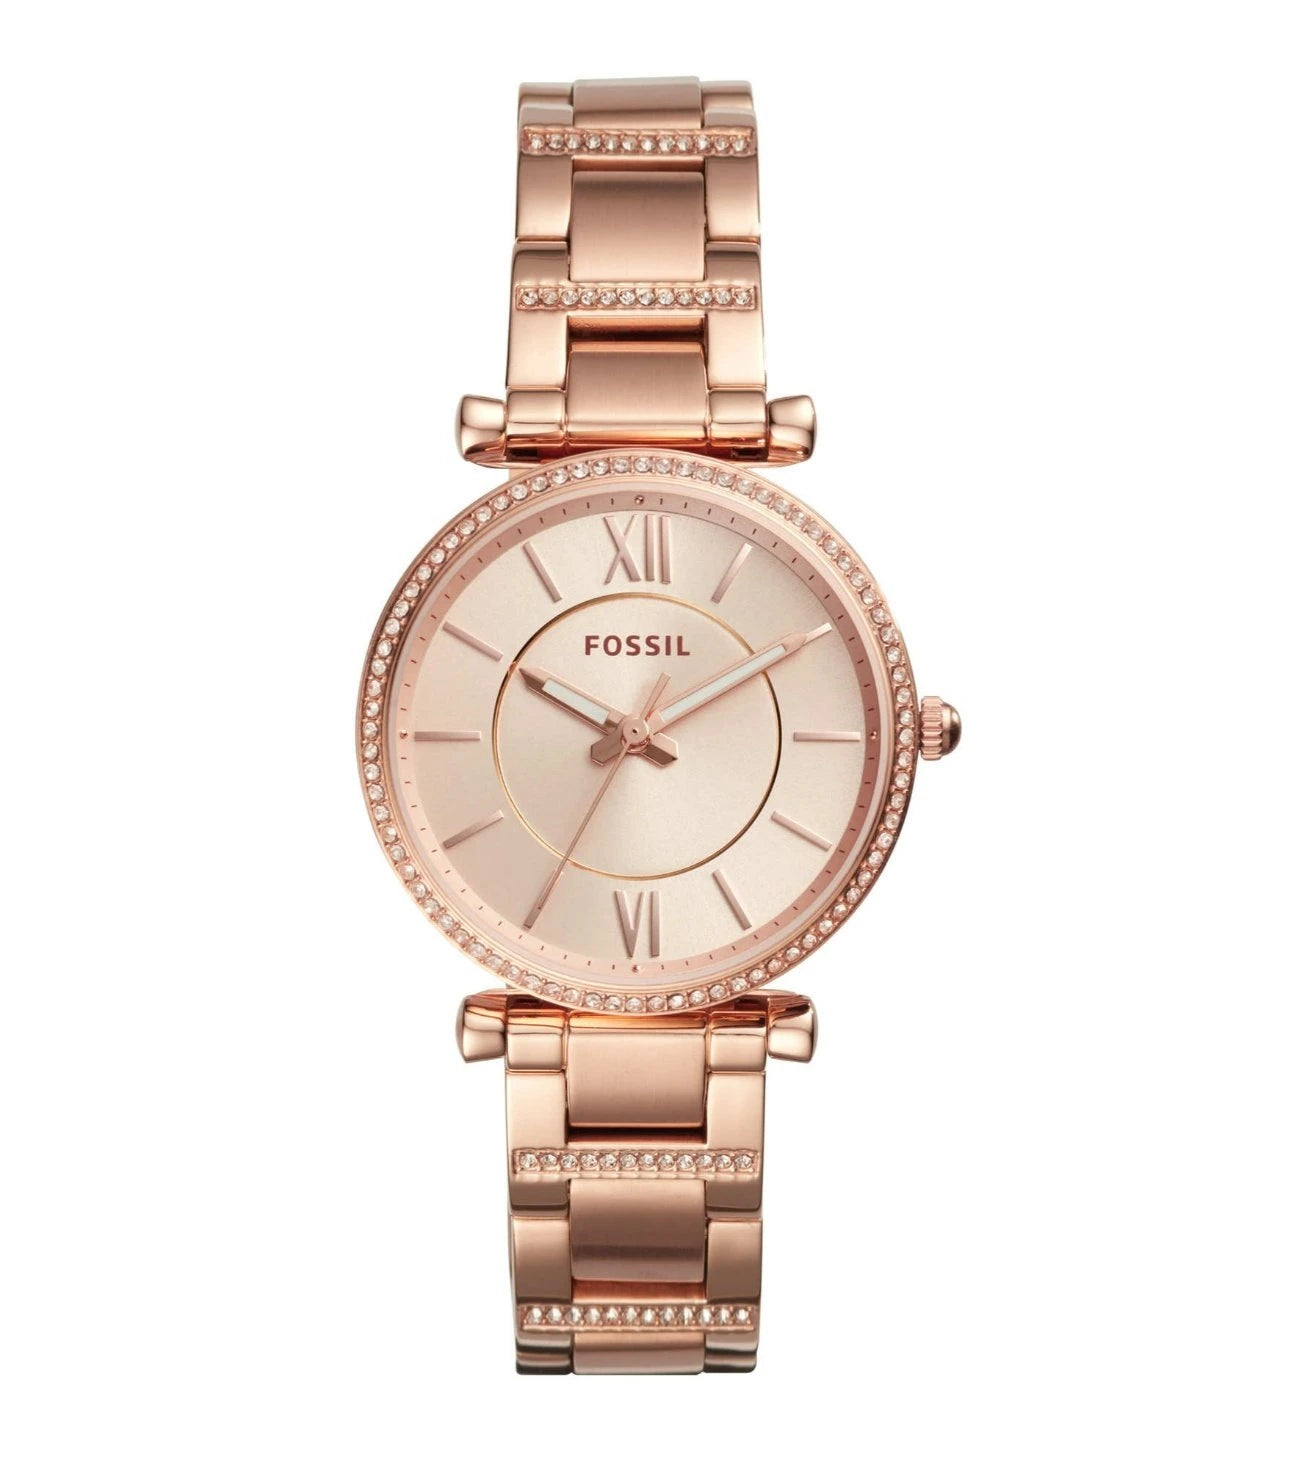 ES4301 | FOSSIL Carlie Analog Watch for Women